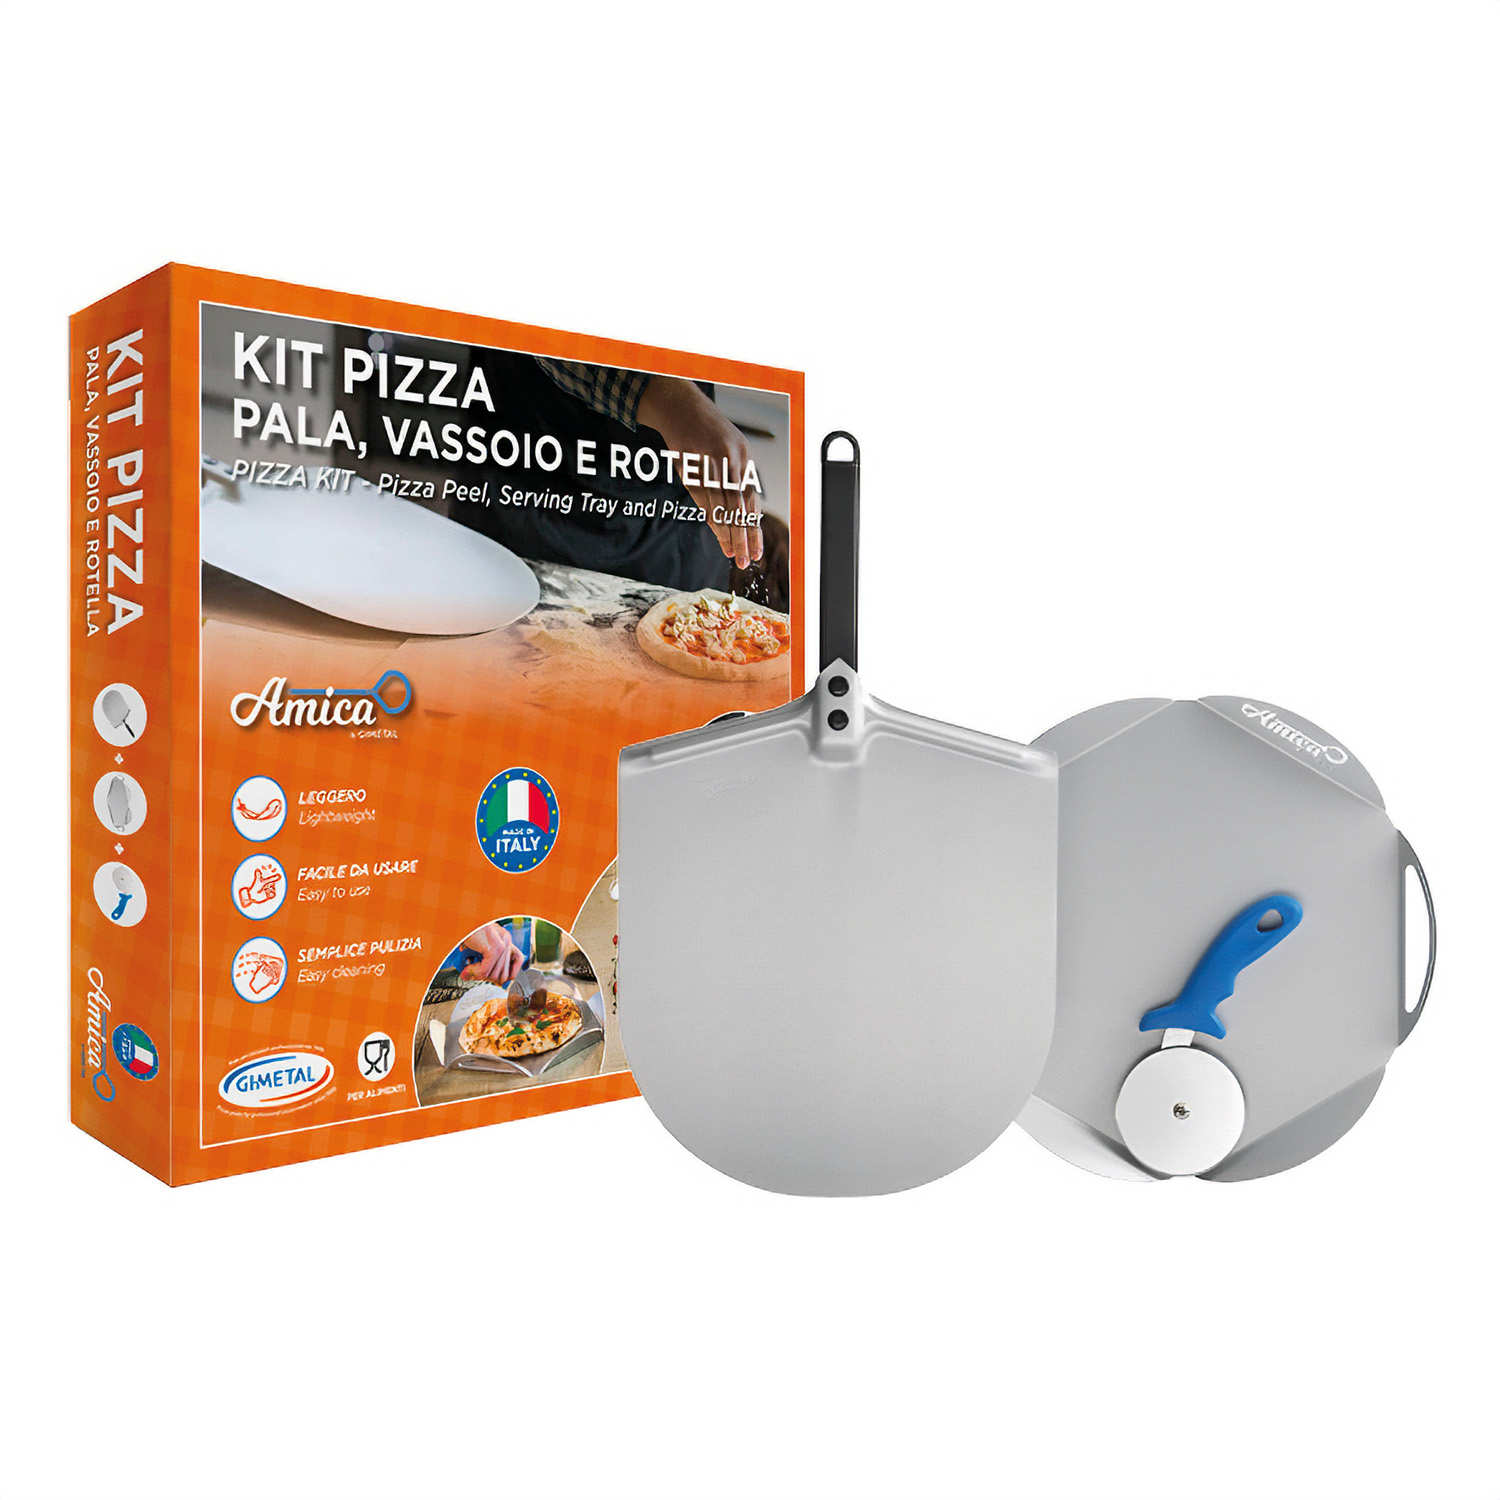 High quality stainless steel pizza kit: 30cm pizza peel, serving tray and  cutting wheel - GI Metal